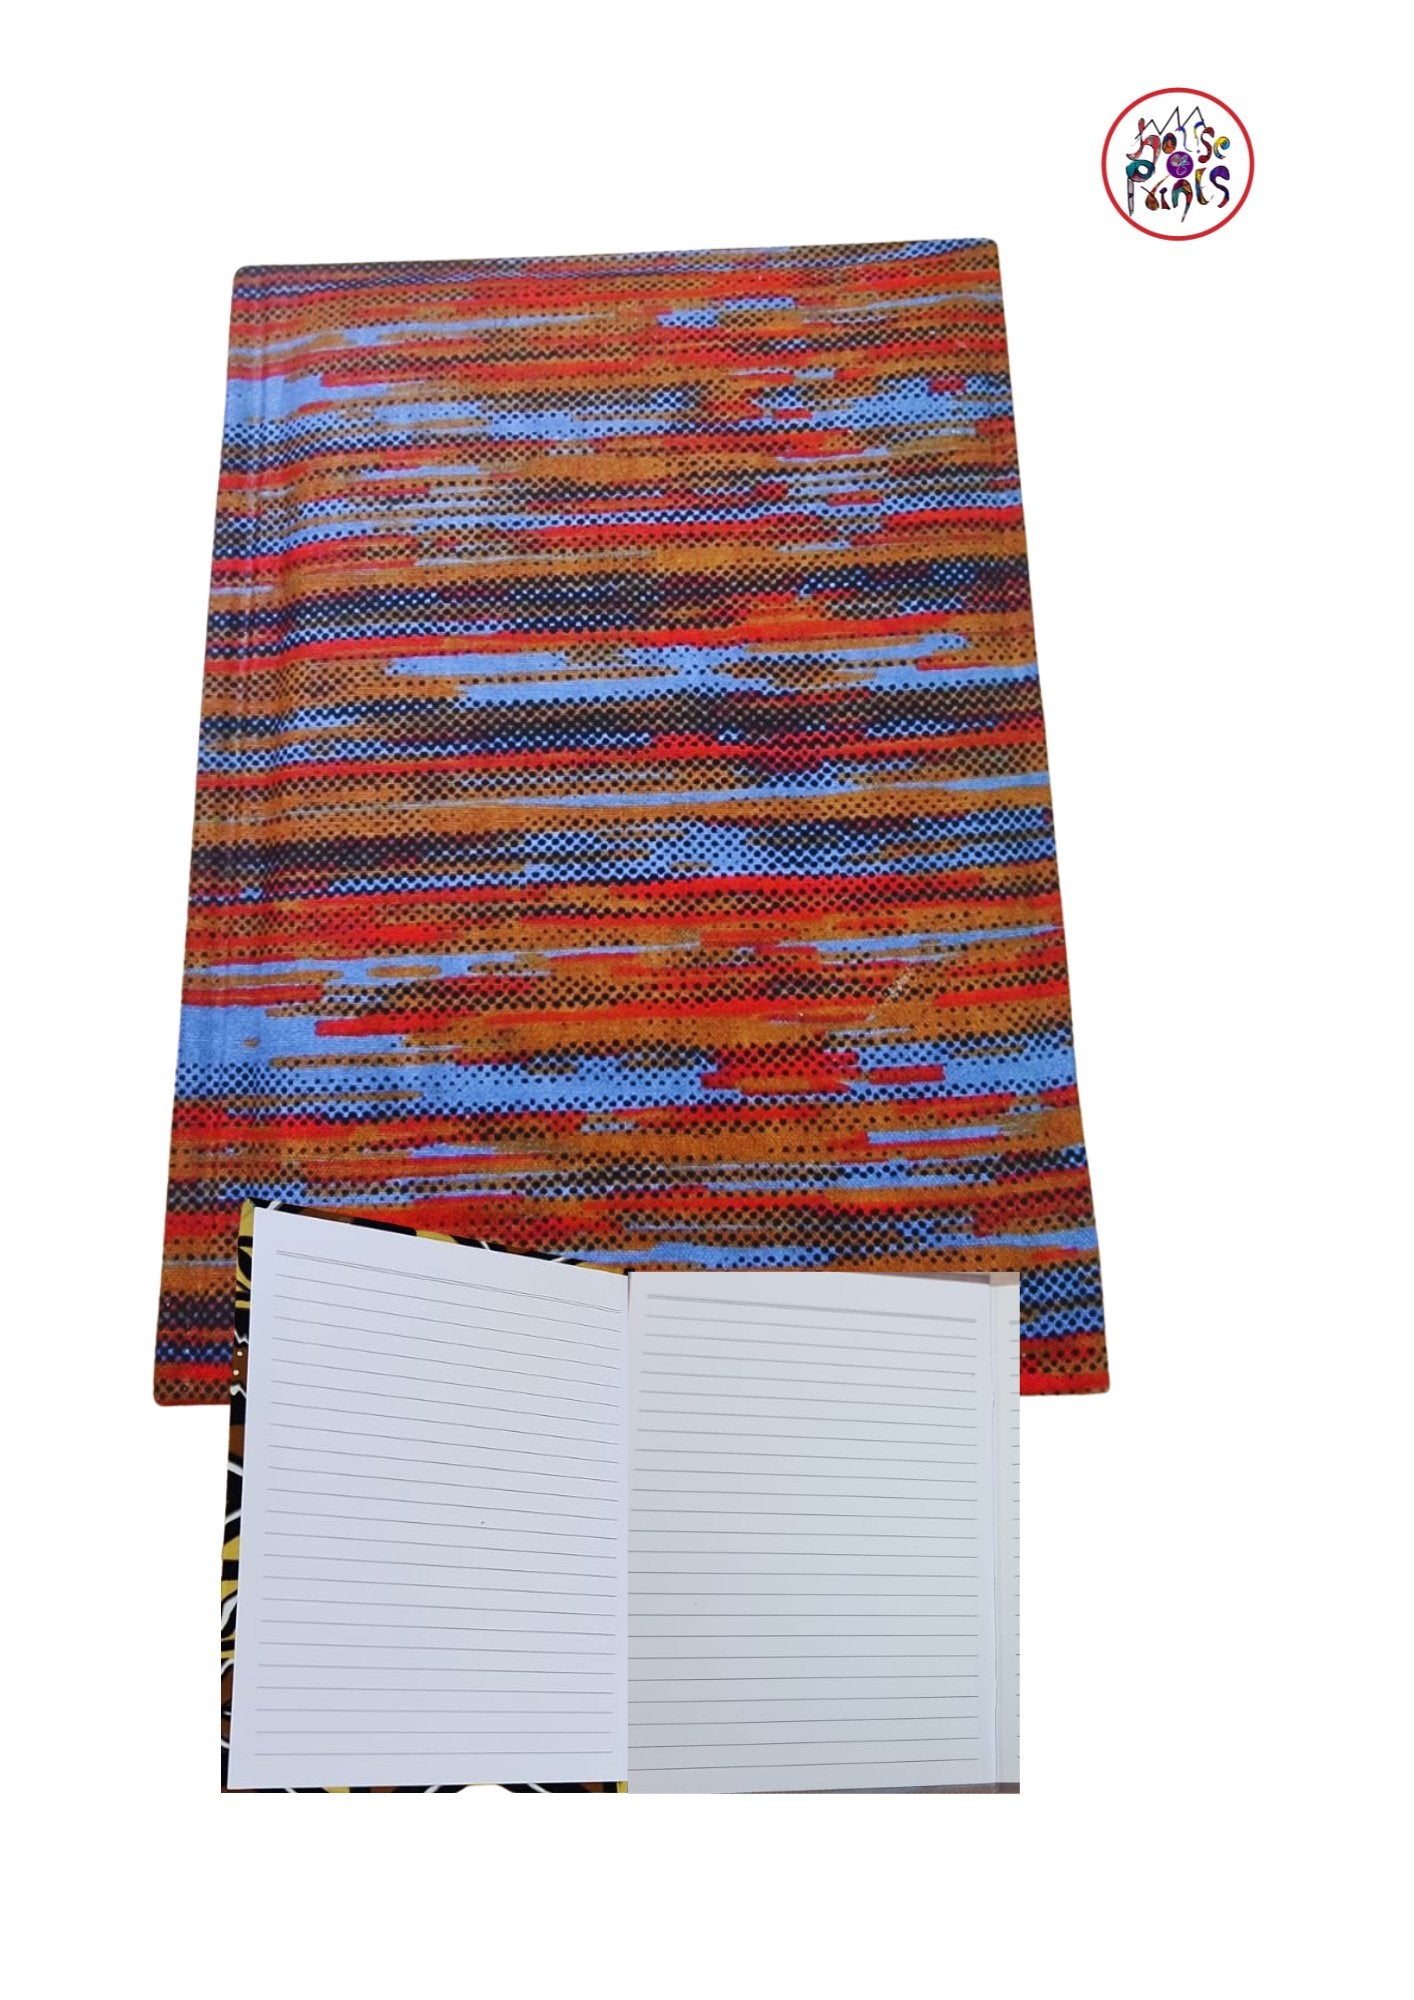 Red & Blue Ankara Notebook - House of Prints